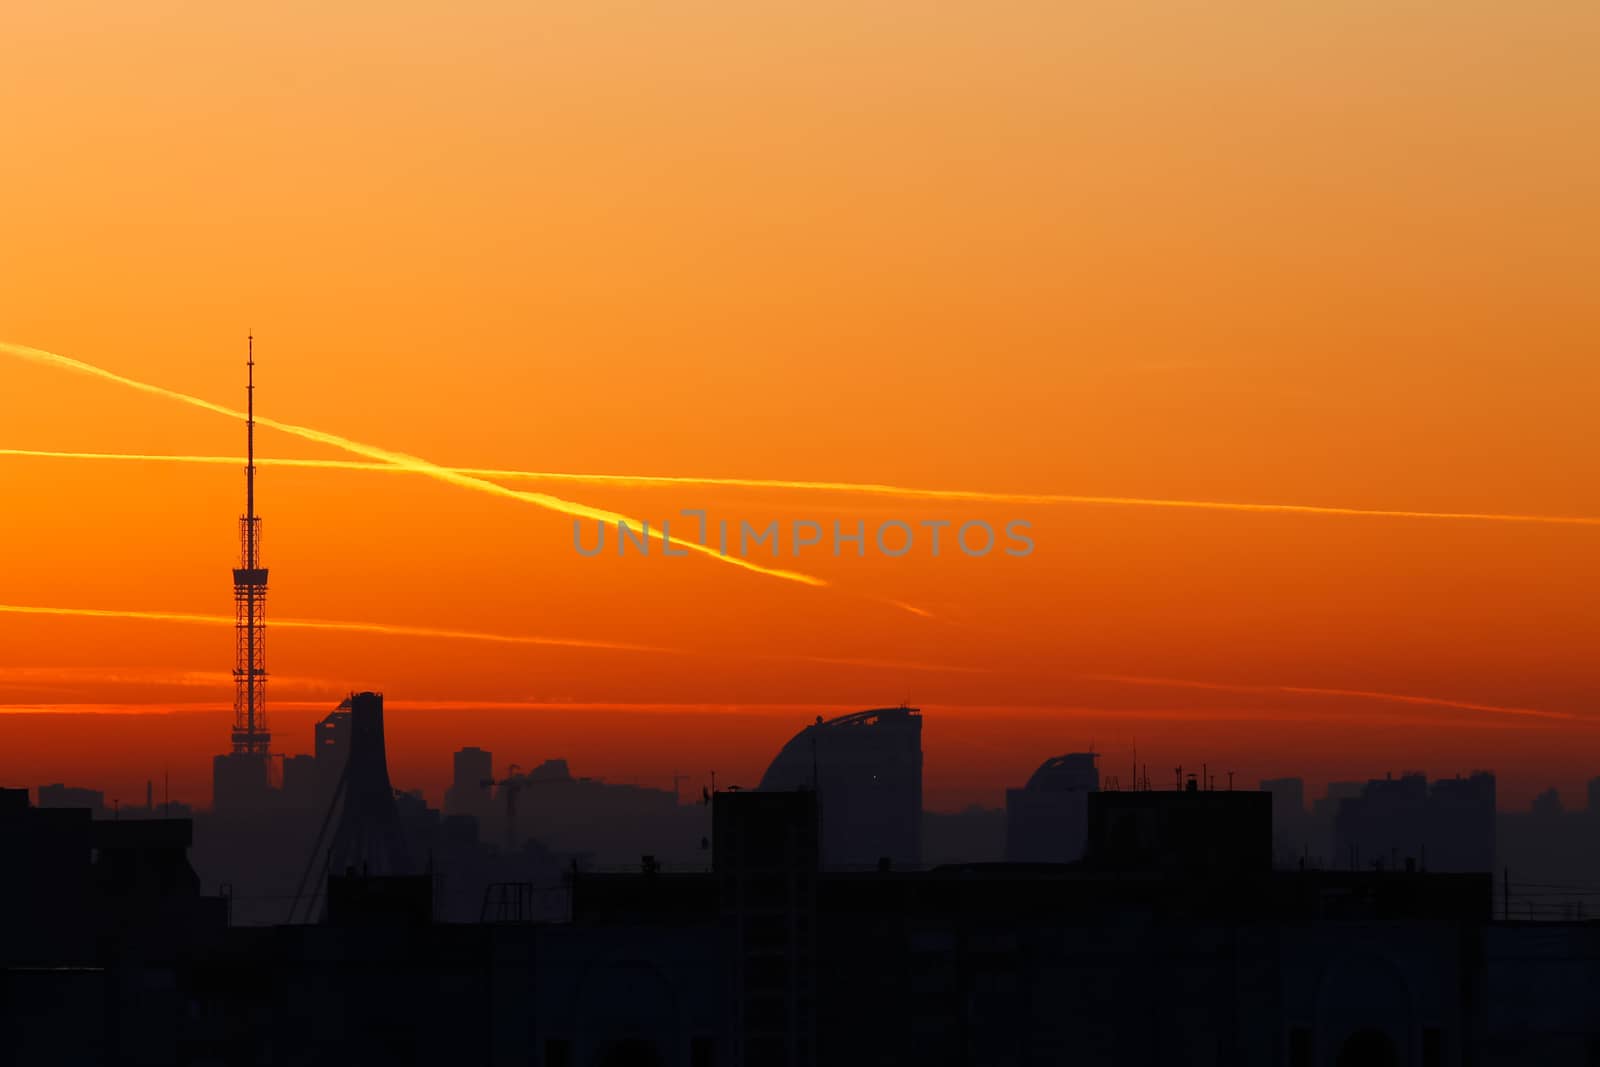 A television tower but against a background of bright orange sun by Opikanets